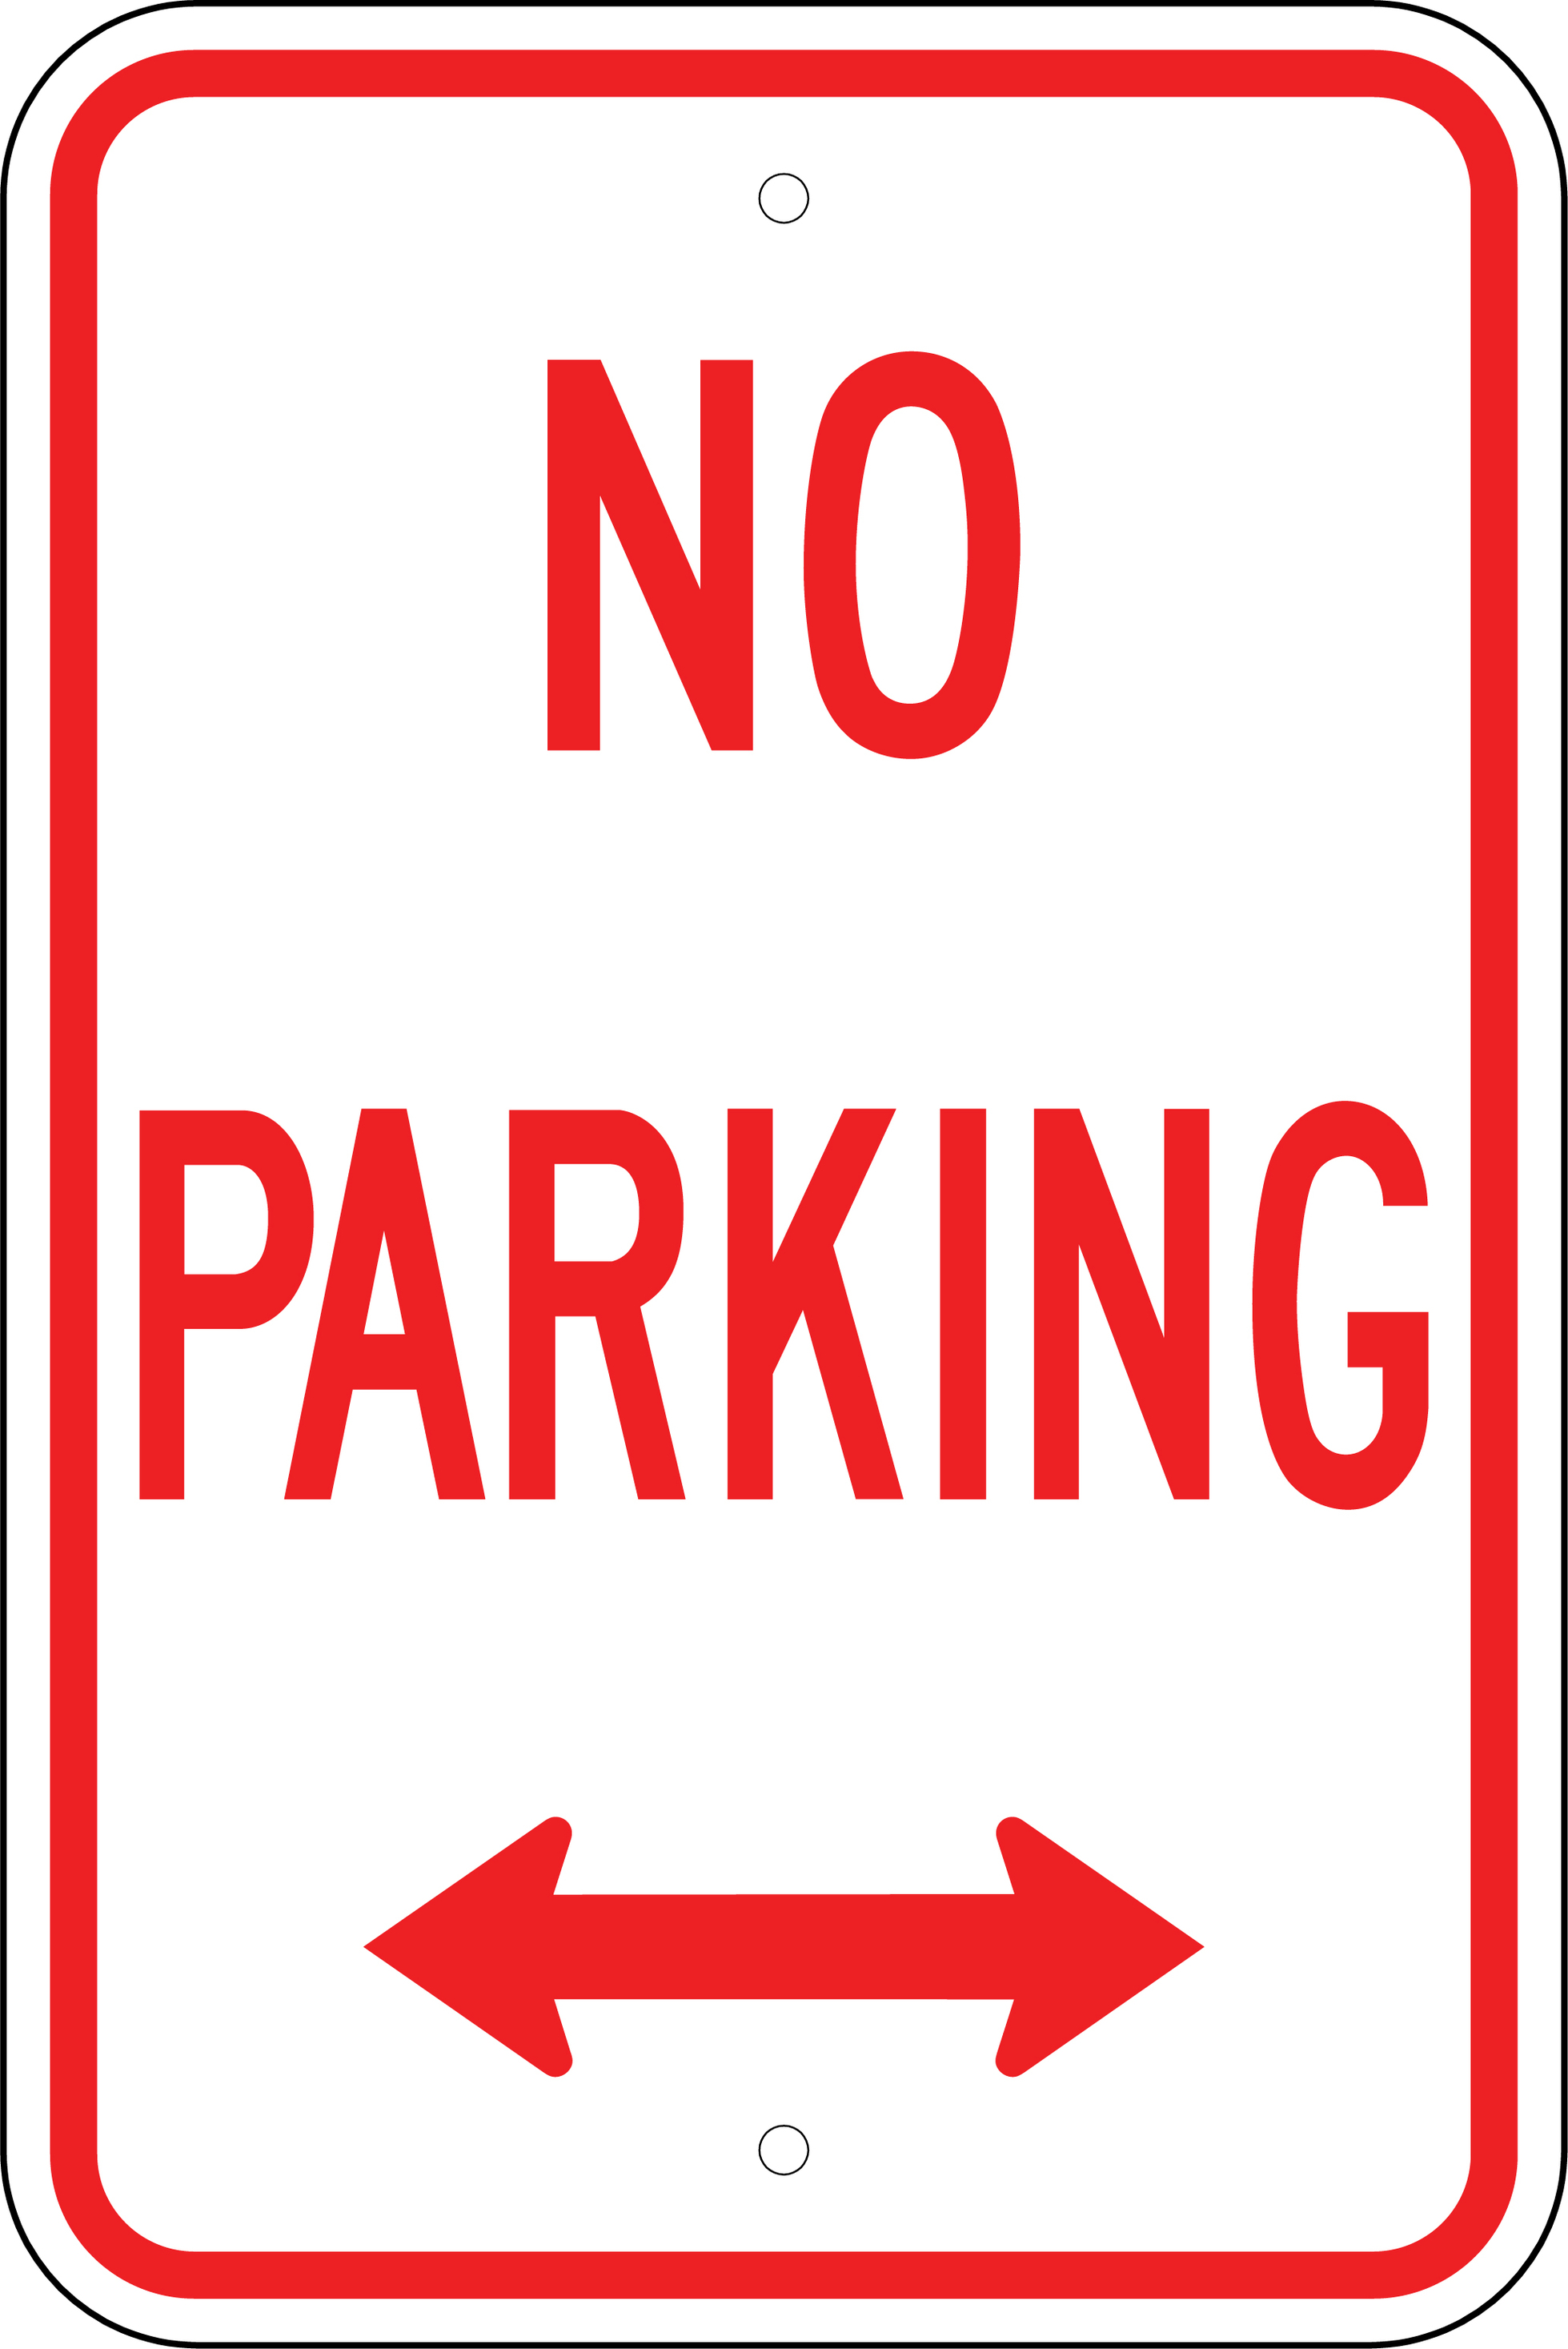 No Parking Signs Printable Clipart - Free to use Clip Art Resource